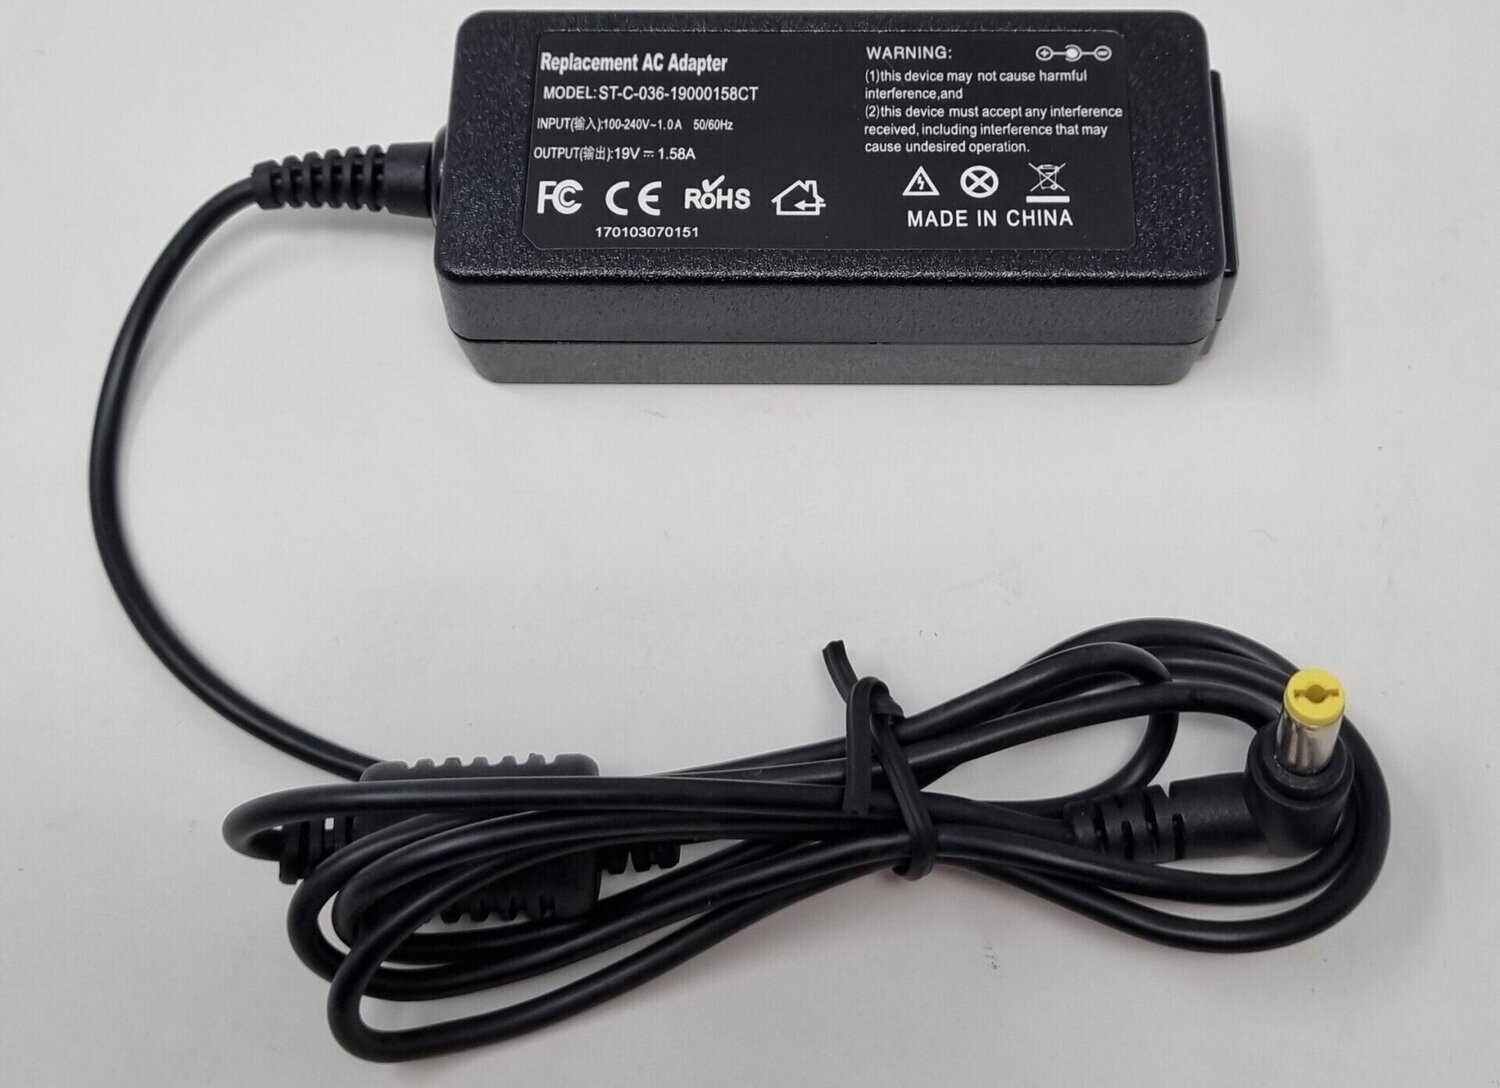 Replacement 19V 1.58A Laptop Charger (VAC017)